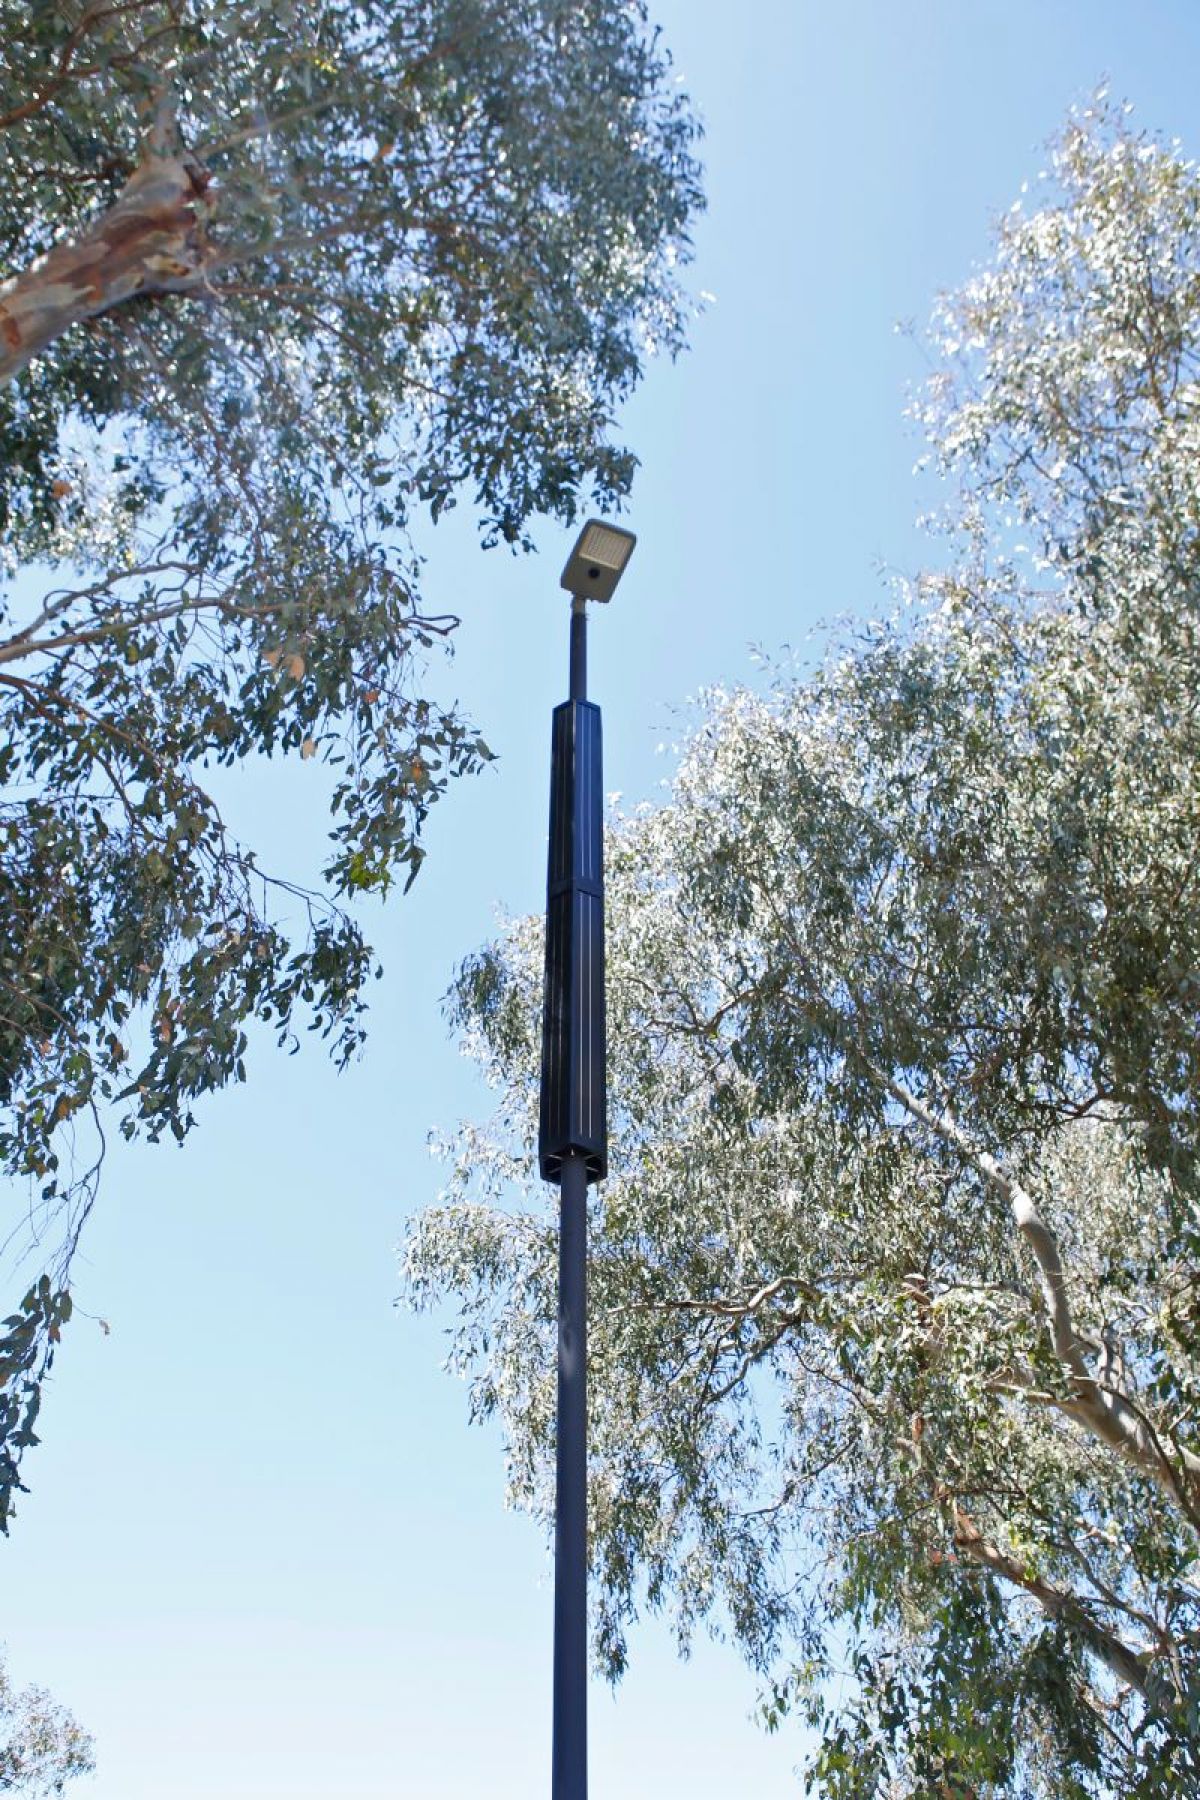 Portrait image of light pole at lake albert from worm's eye view camera angle. Eucalyptus tree branches hand in the background behind the light. 